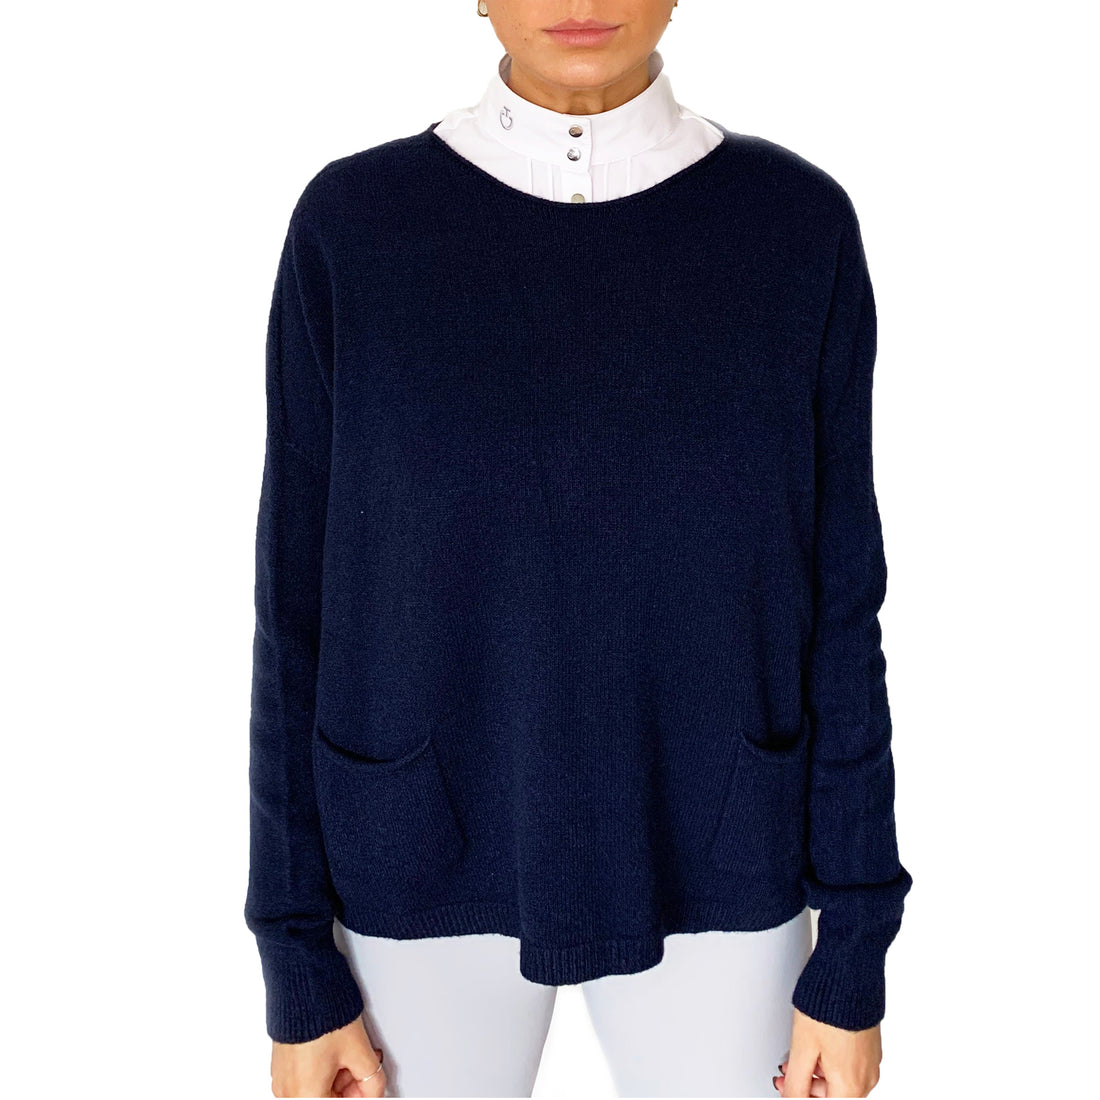 Round Neck jumper with front pocket detail.  This versatile jumper is super soft and an easy piece to have in your wardrobe. Great for shows when its a but chilly or equally usable on the yard.   50% Viscose  27%polyester  23% Polyamide